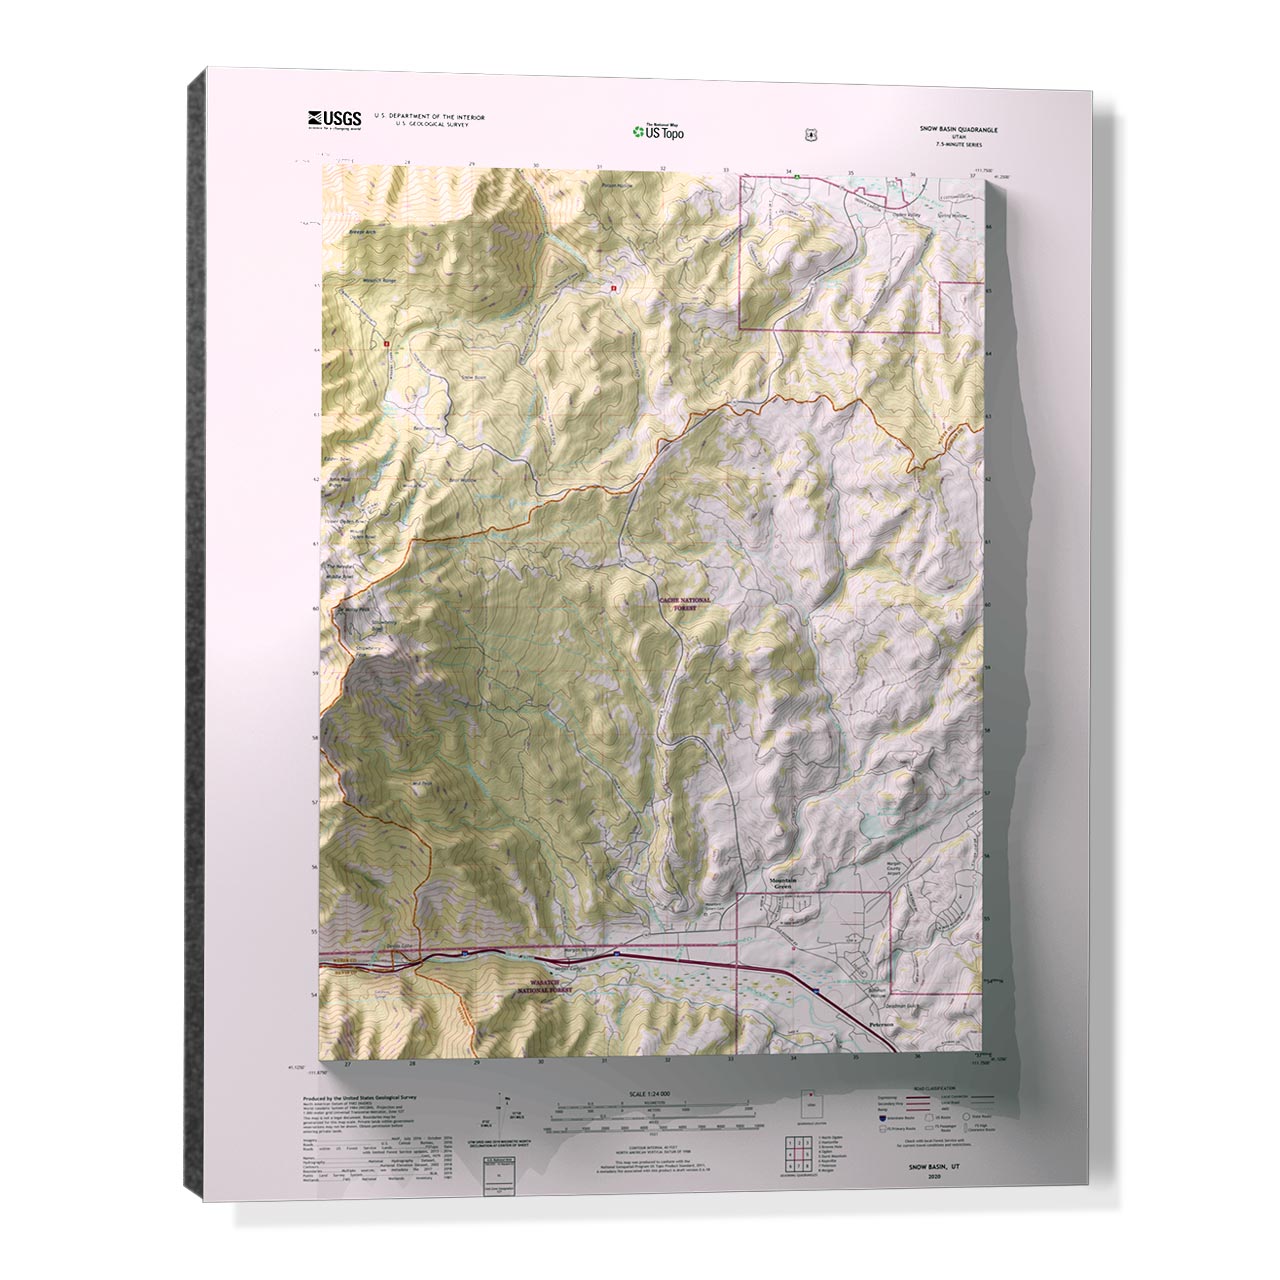 Texas-3D USGS Raised Relief Topography Maps